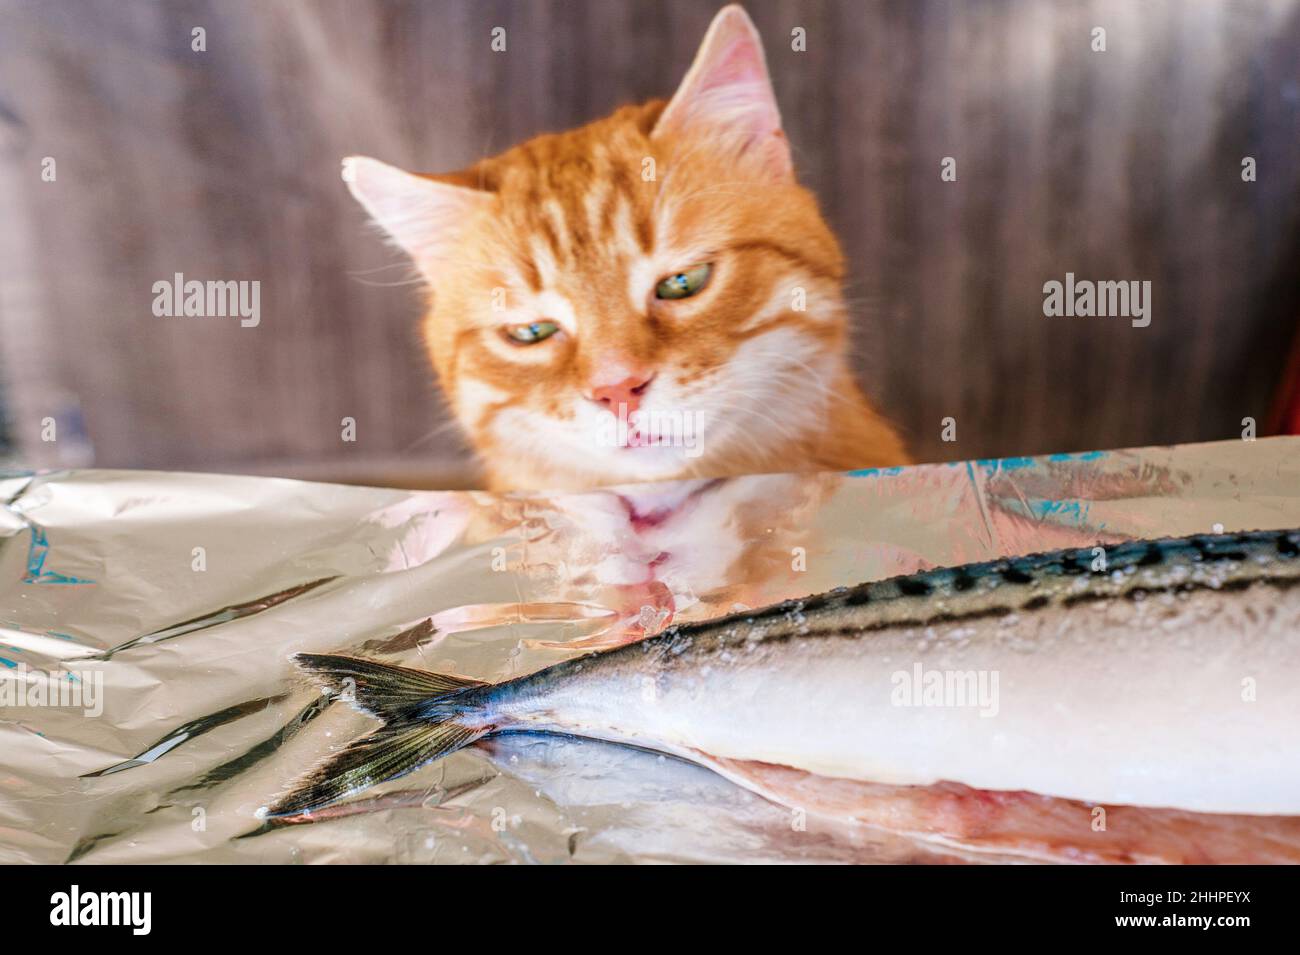 Fresh mackerel with sea salt lie on a shiny aluminum foil. Red cat sits nearby and sniffs. Fat fish rich in omega-3, flat lay, top view. Stock Photo